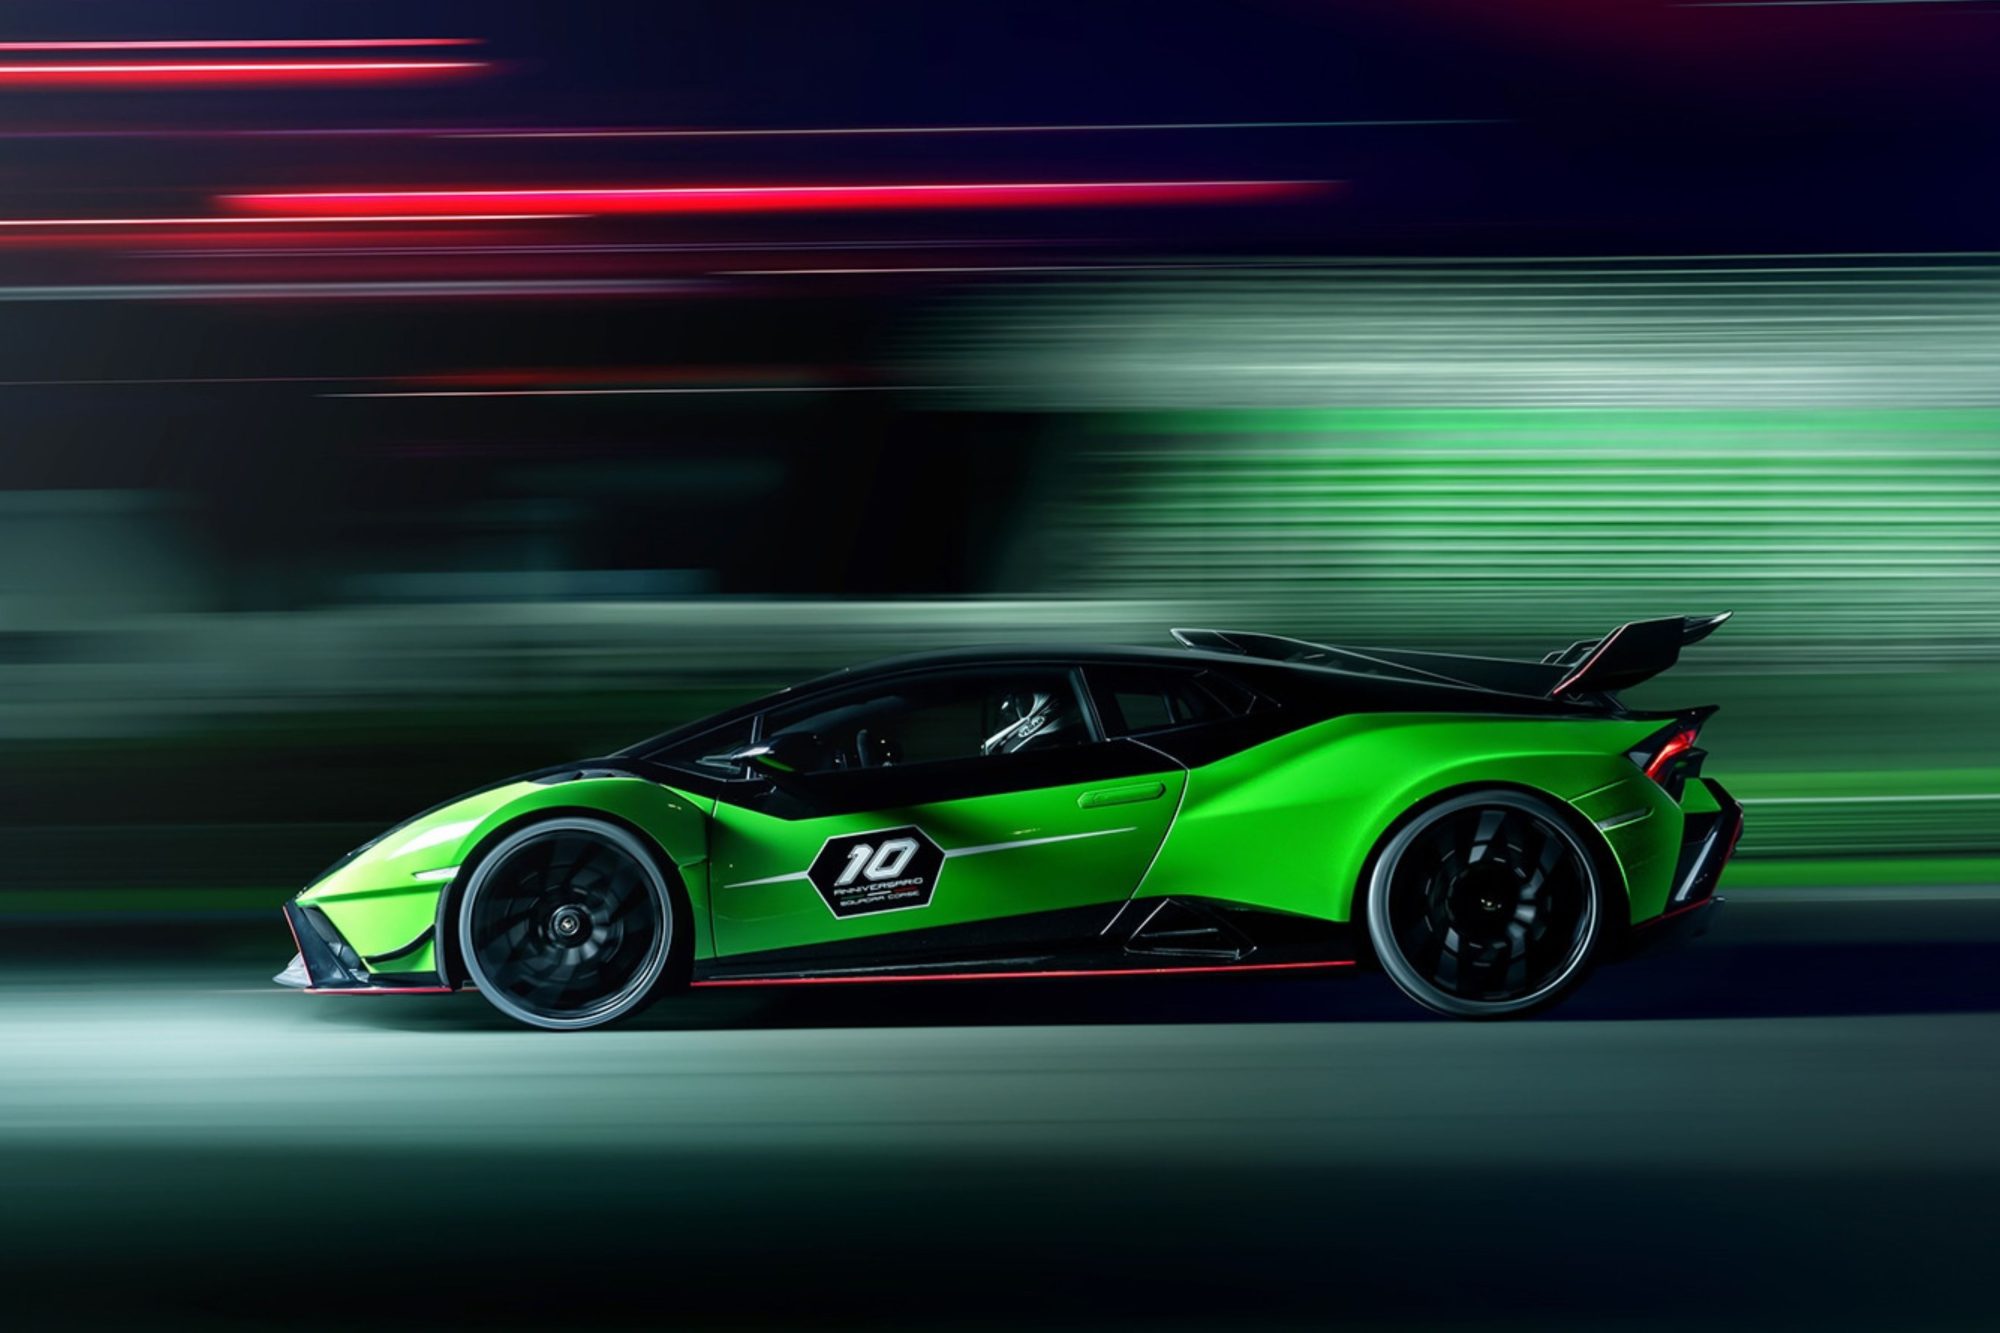 Lamborghini has unveiled a special edition of the Huracan STO